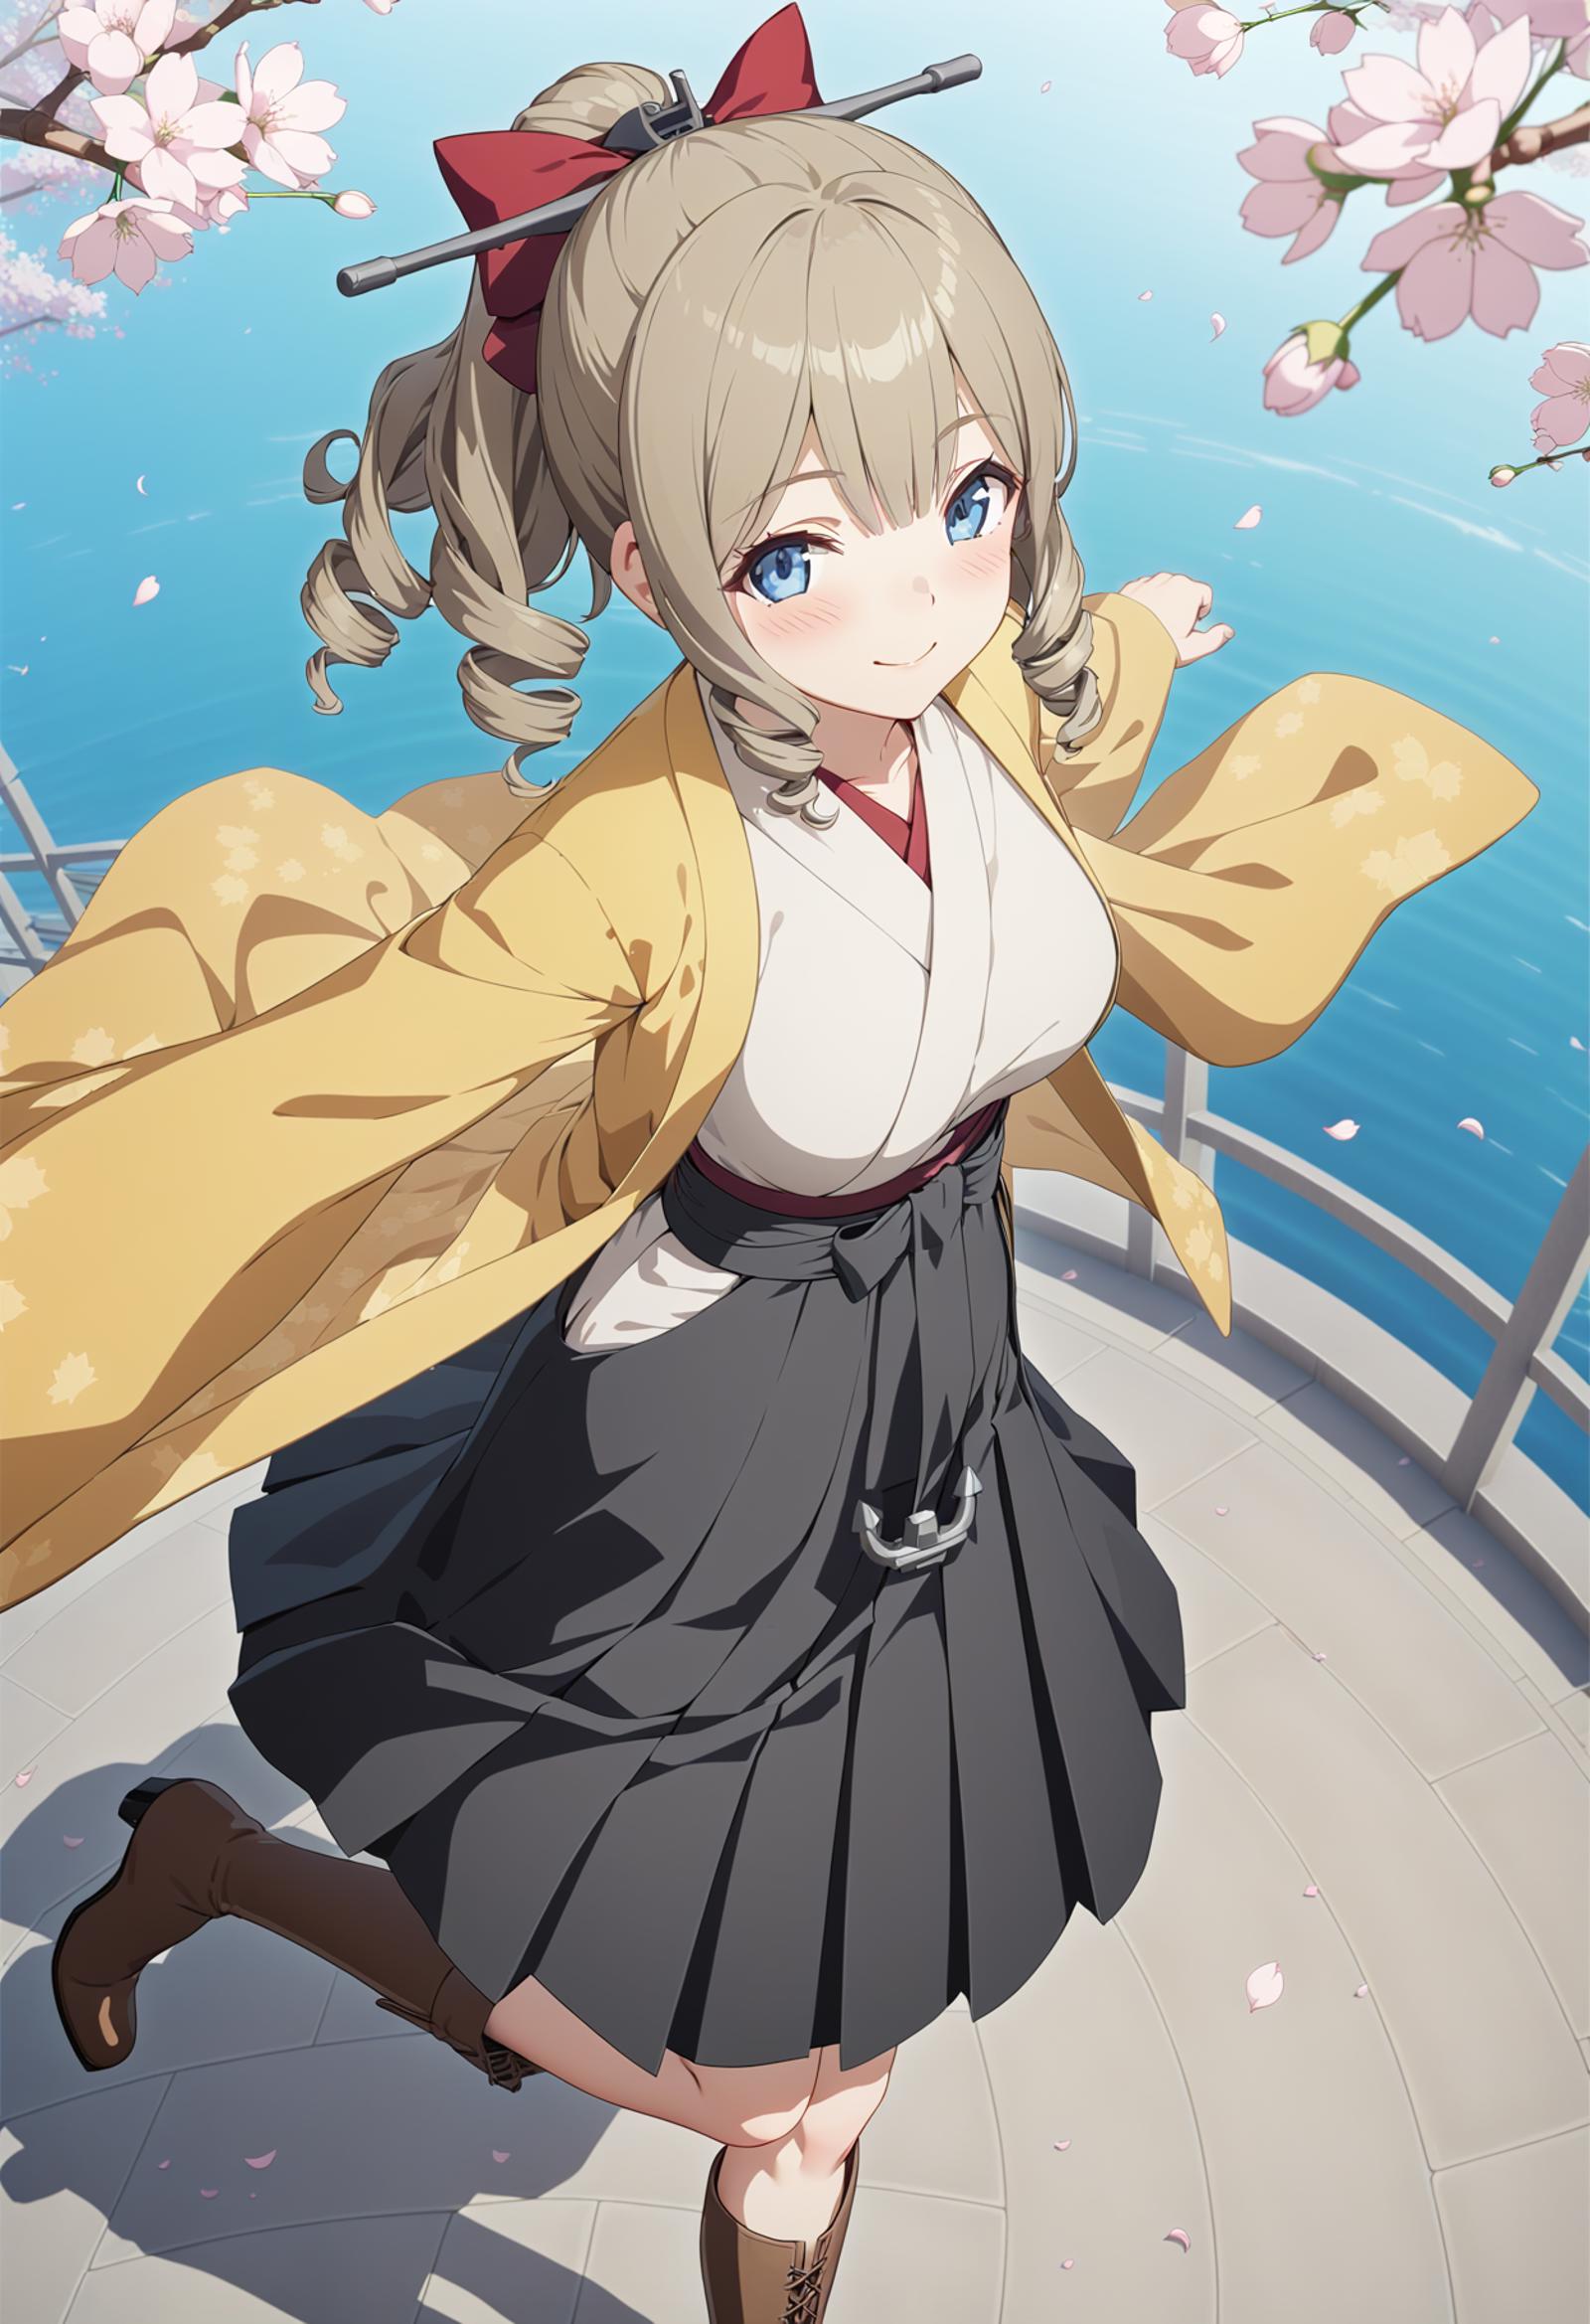 [SDXL] Kamikaze-class Outfit - Kantai Collection - Kancolle  | 神風型服 艦隊これくしょん 艦これ SDXL版 image by Machi